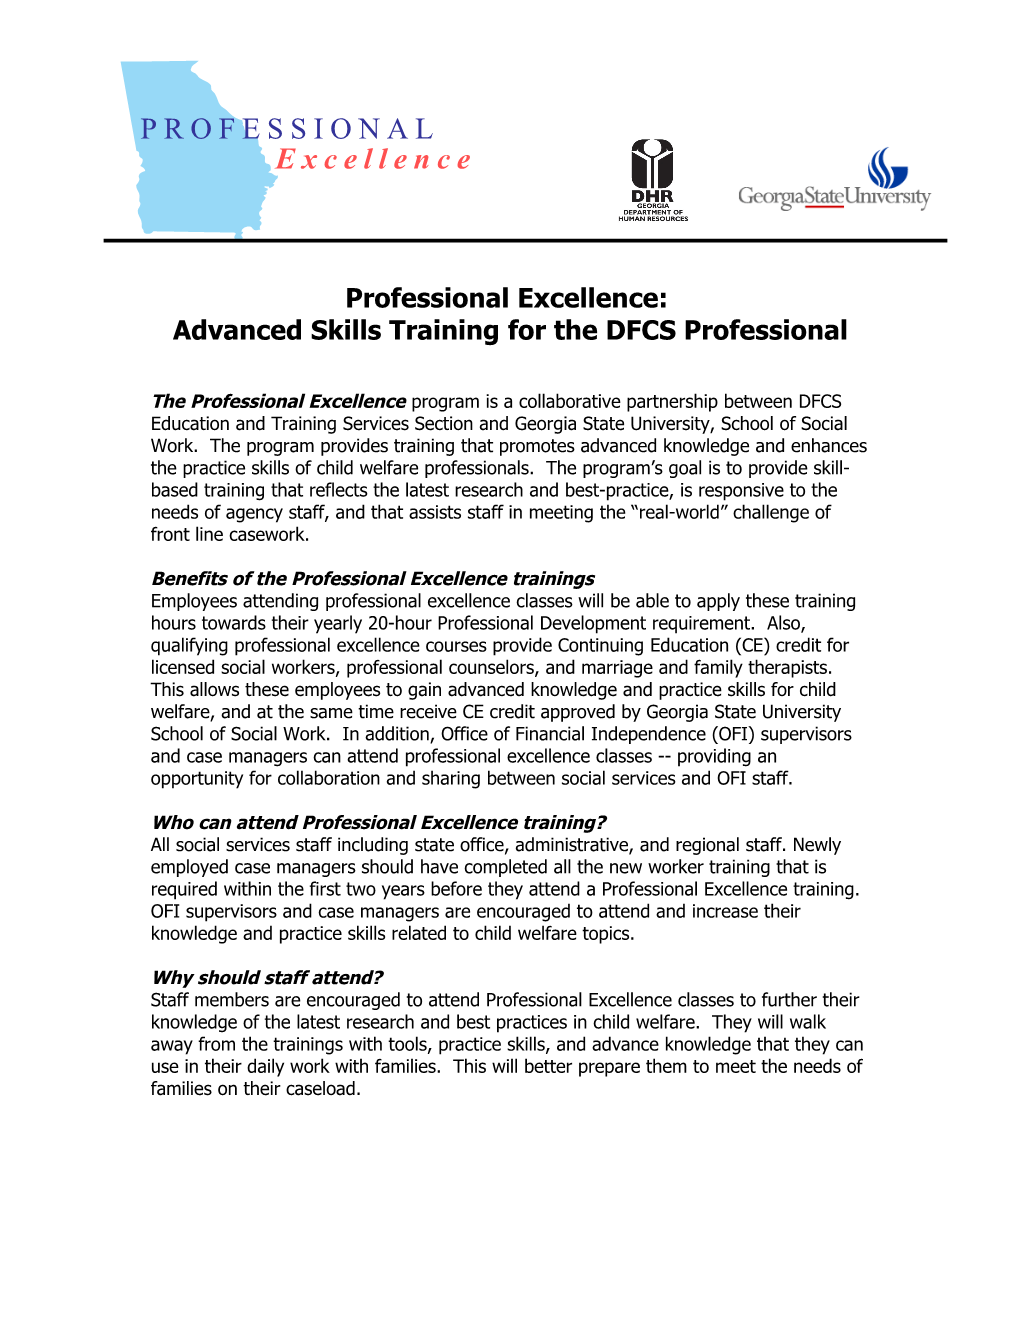 Professional Excellence: Advanced Training for DFCS Case Managers and Supervisors